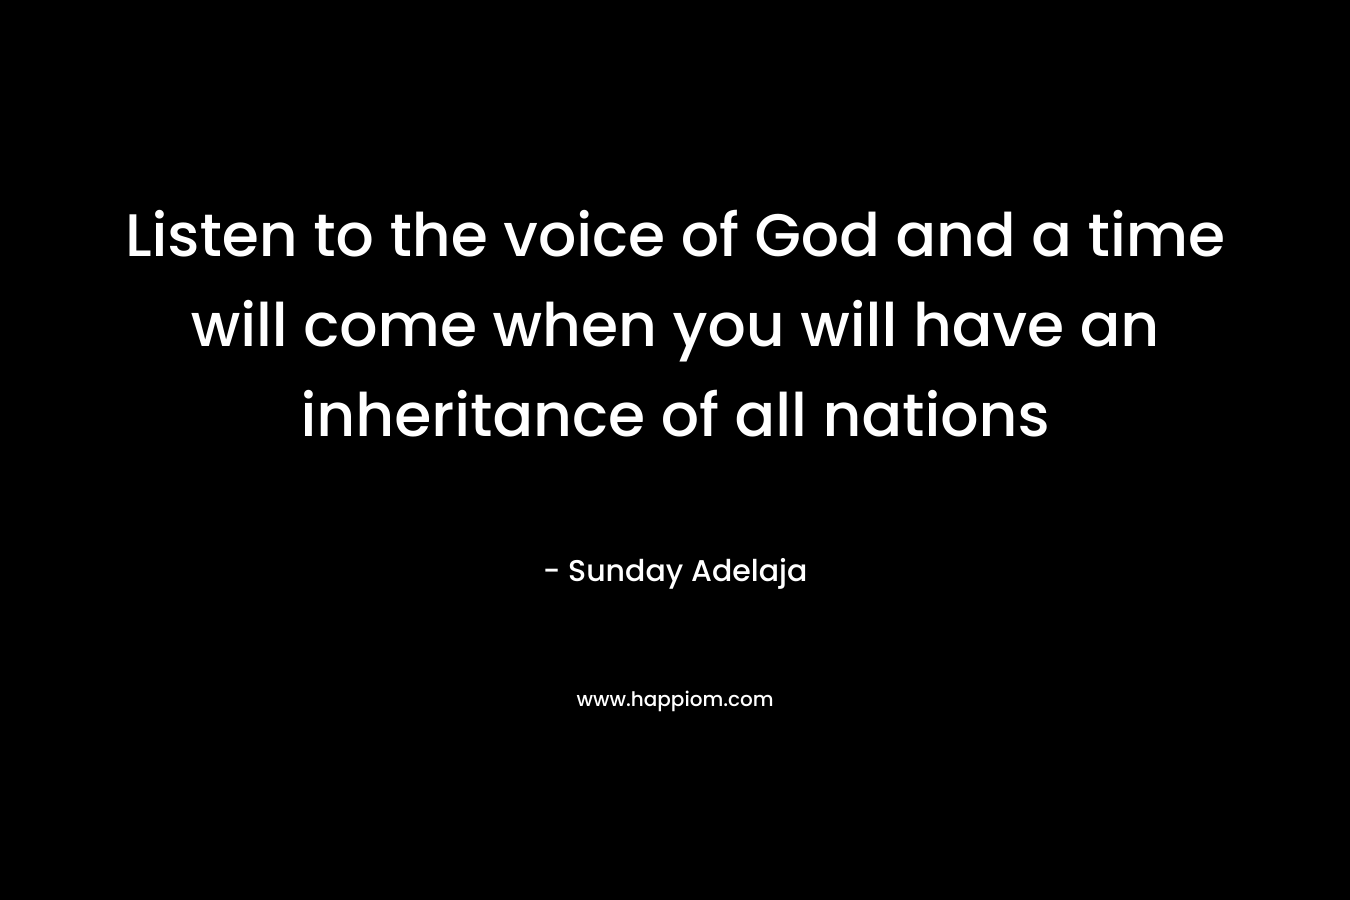 Listen to the voice of God and a time will come when you will have an inheritance of all nations